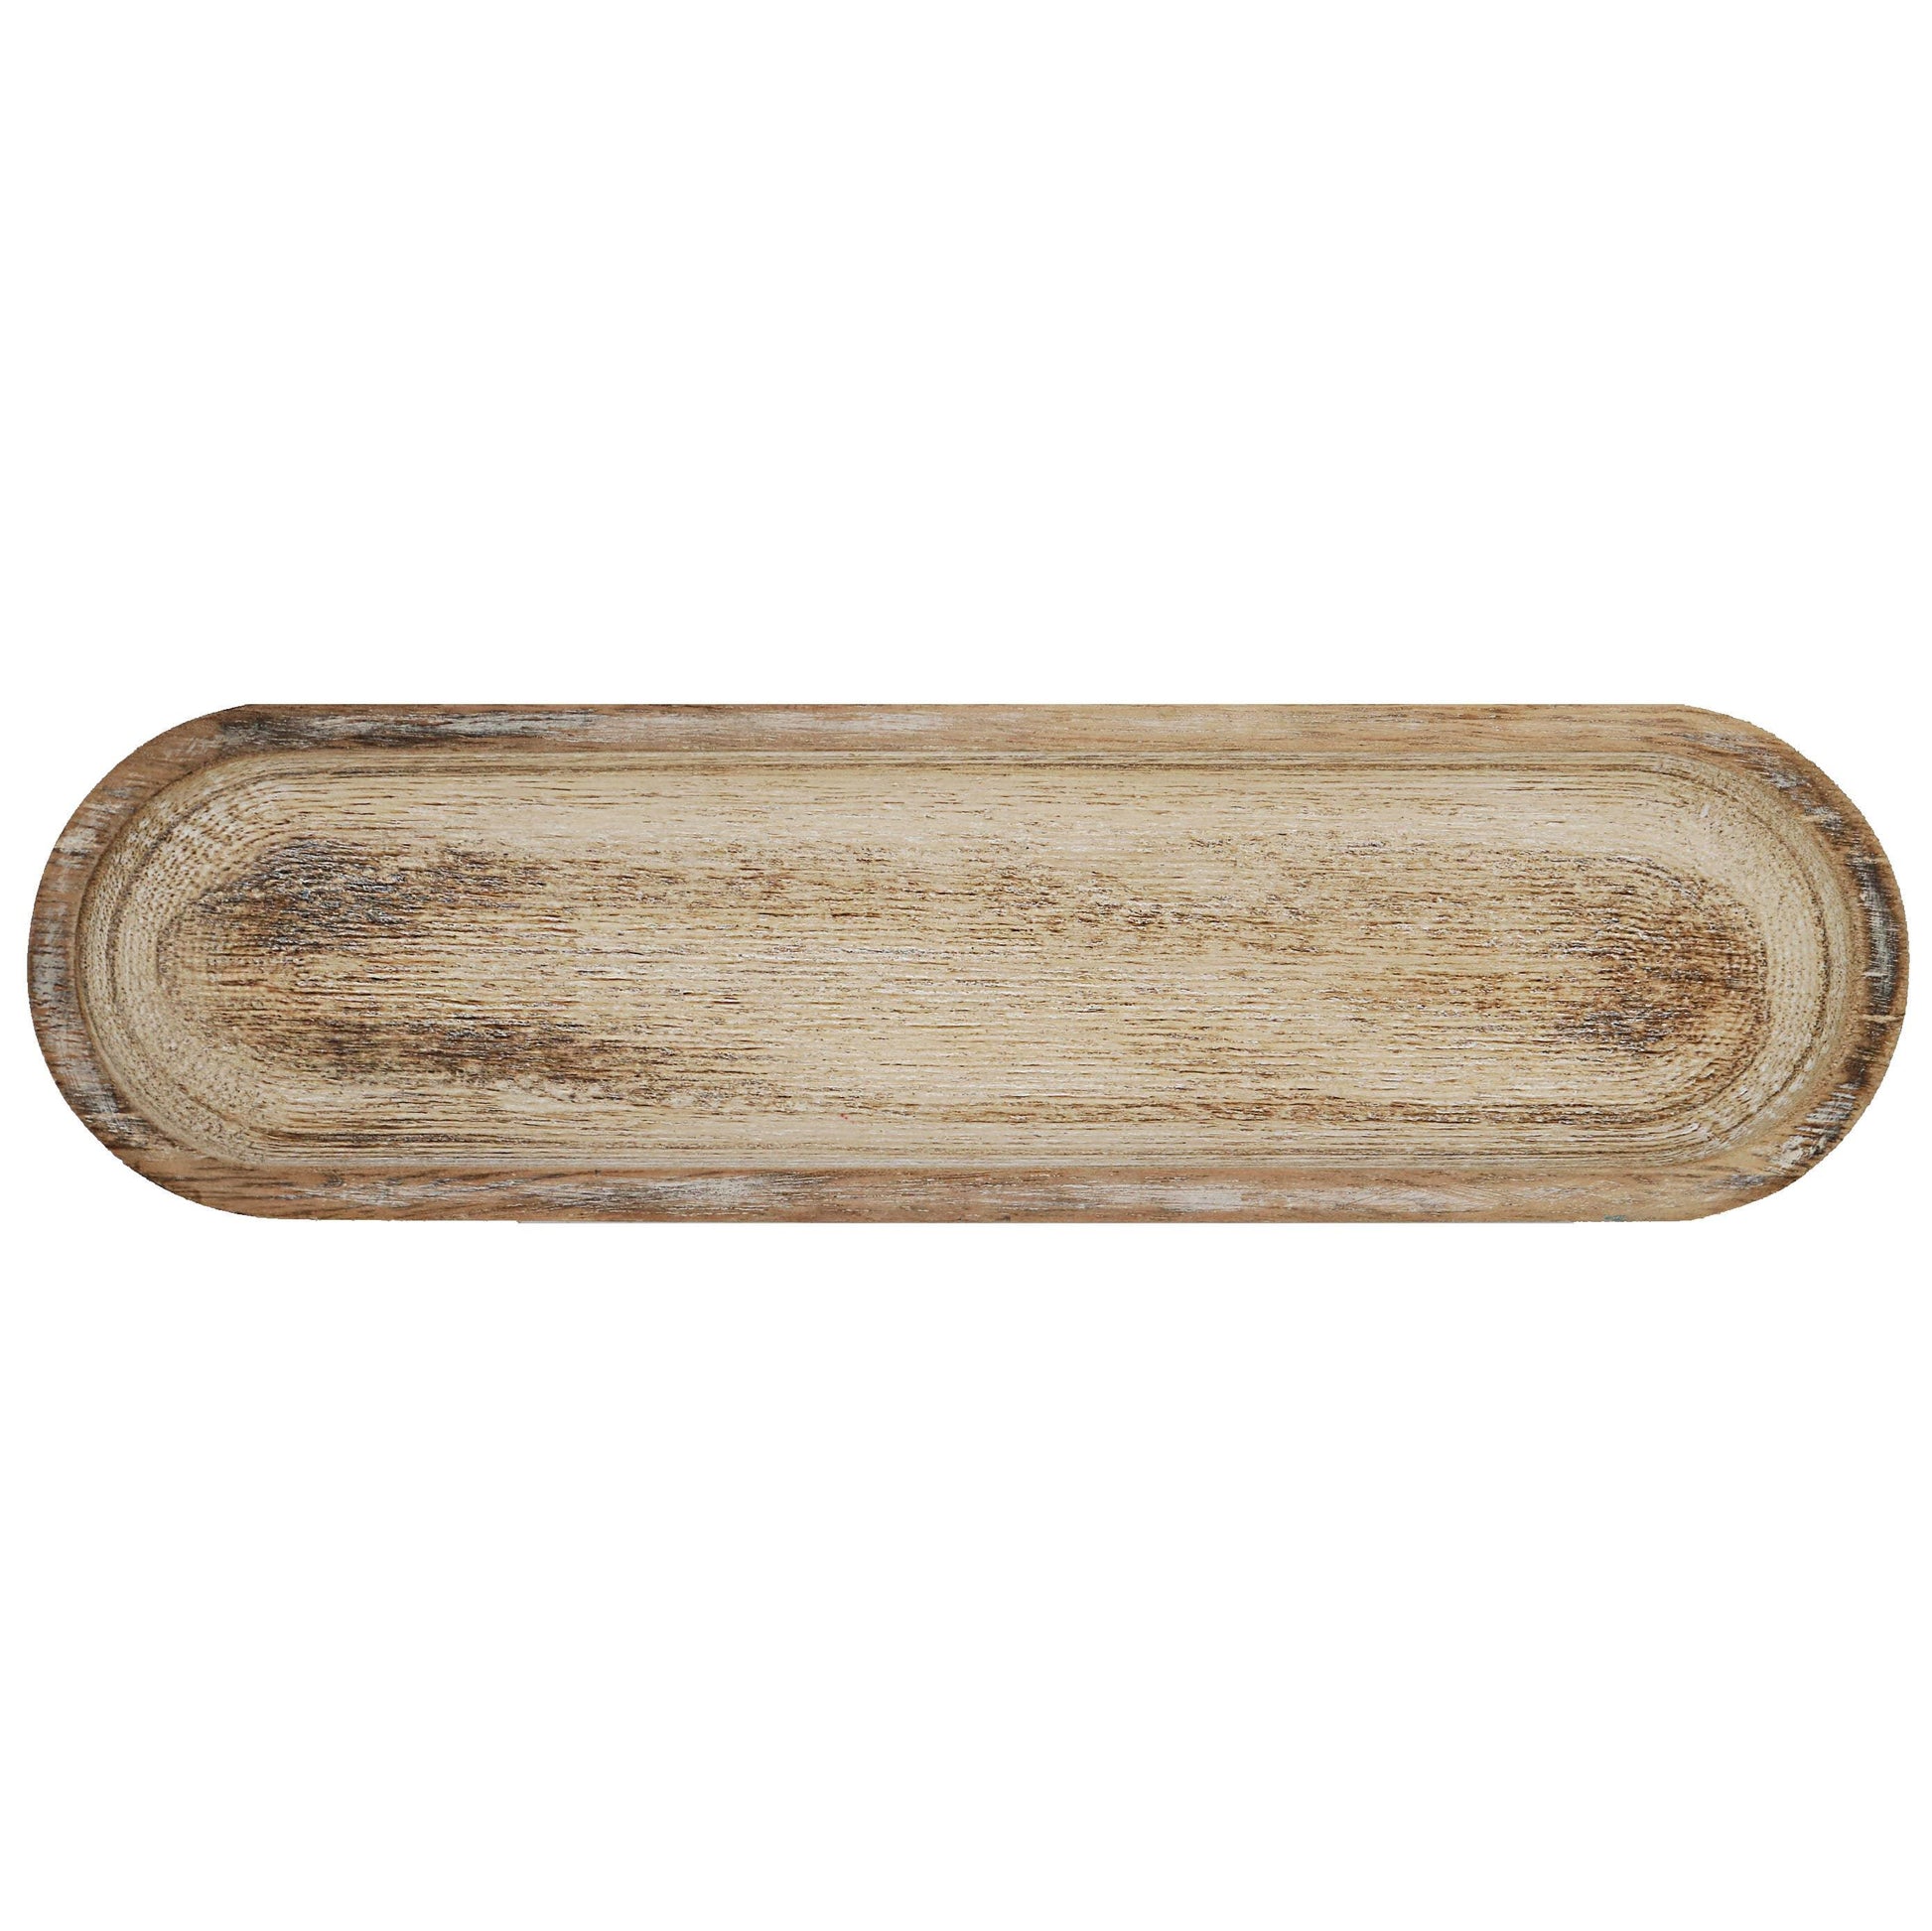 Large Wood Tray - Rustic - 14x4 - The Silver Dahlia